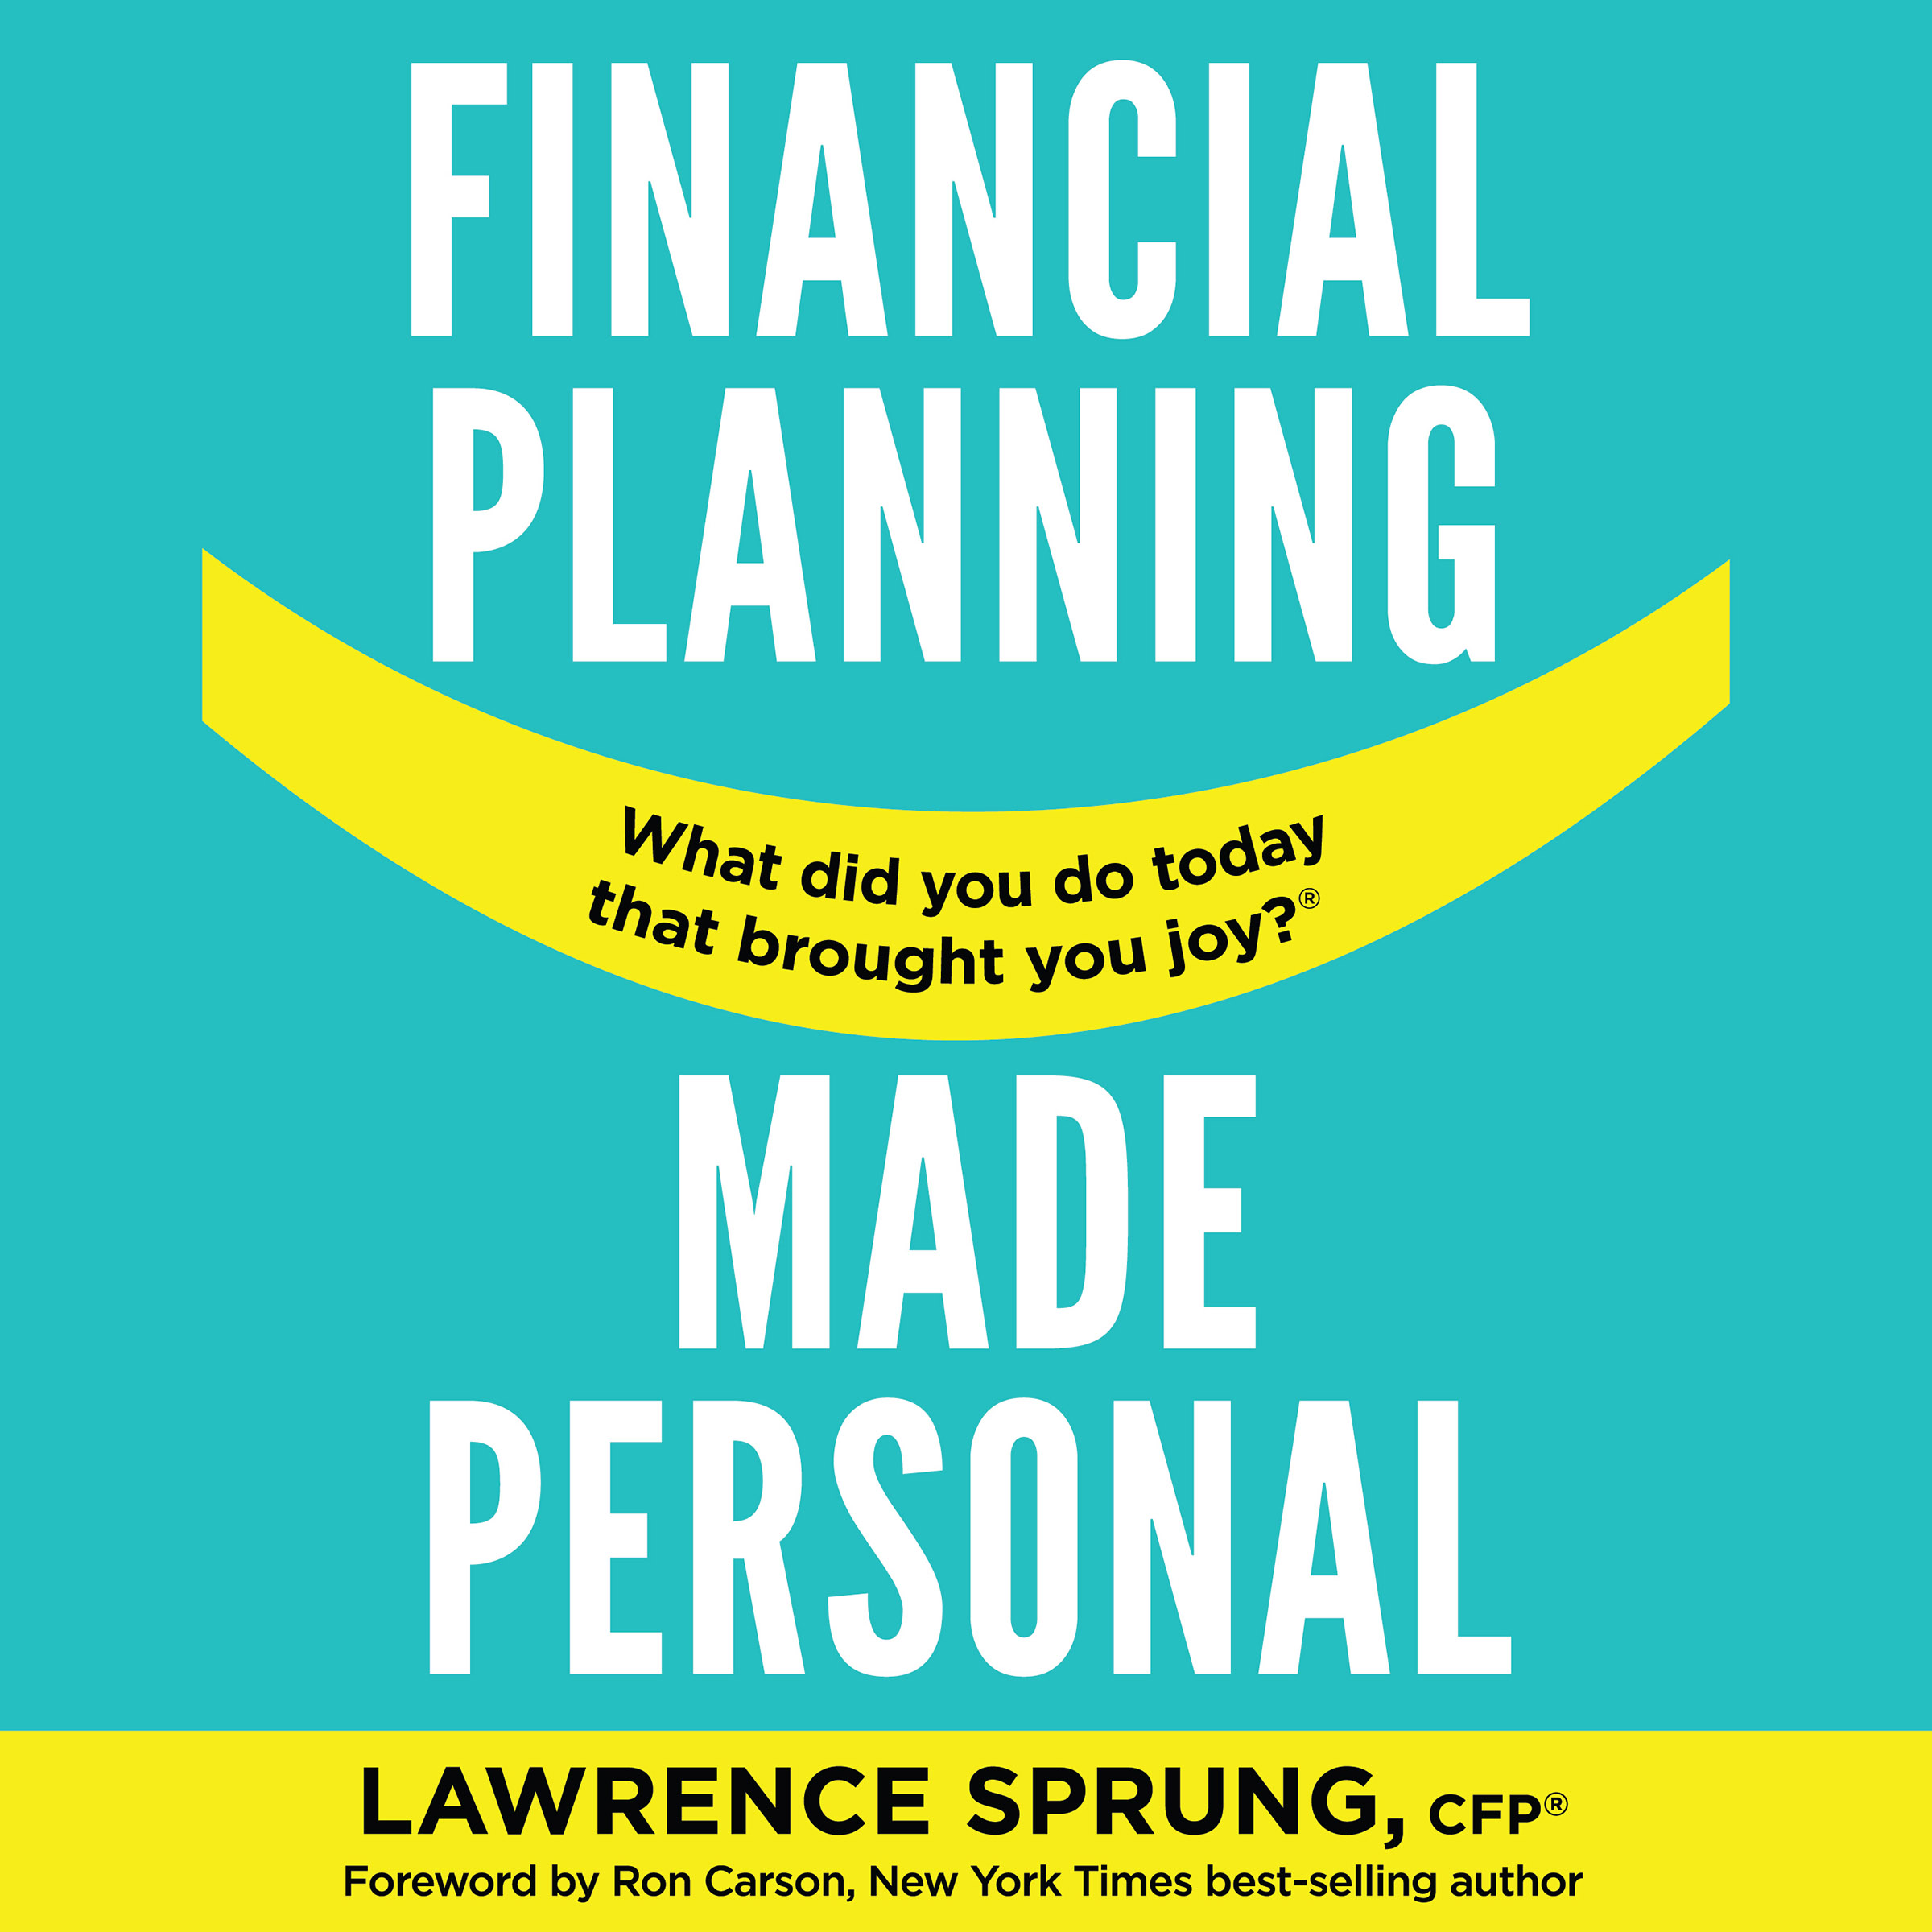 Financial Planning Made Personal – Learn How to Create Joy and the Mindset of Success